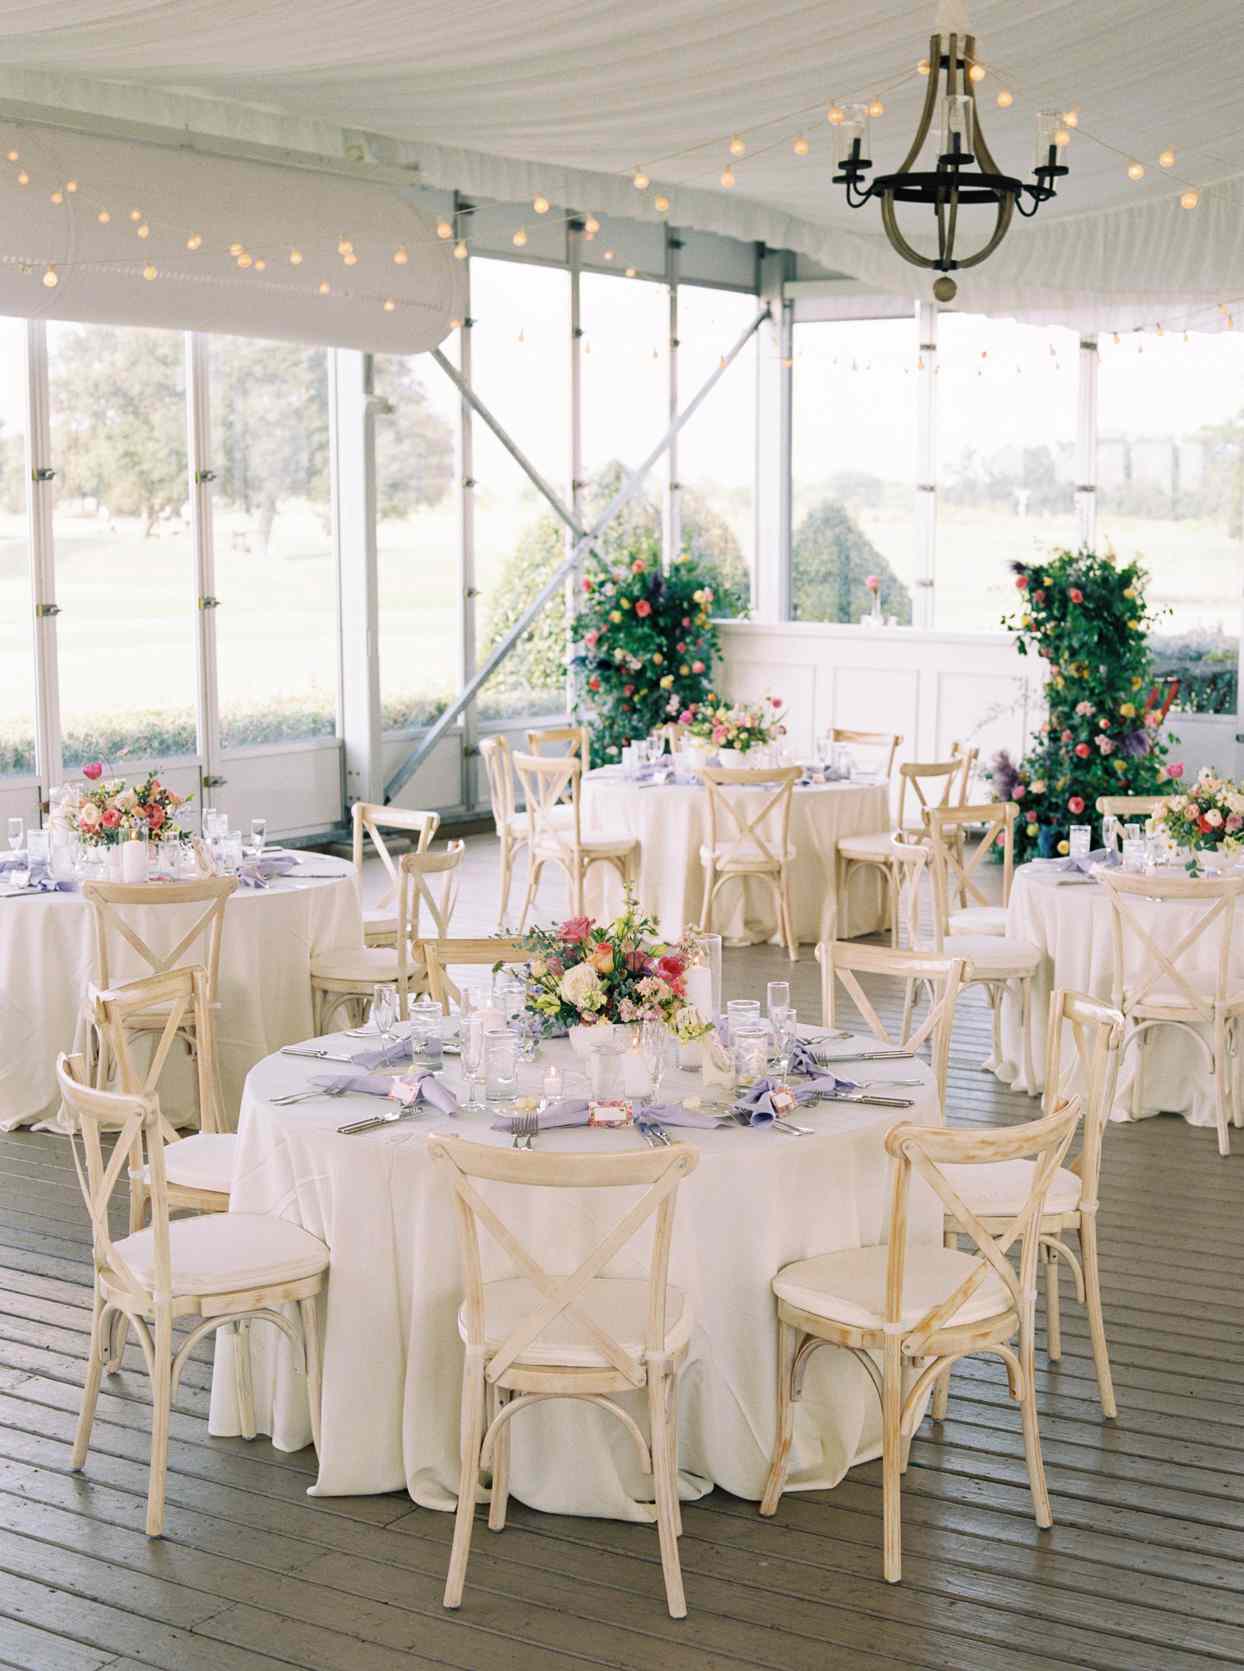 wedding reception setup in room with large windows